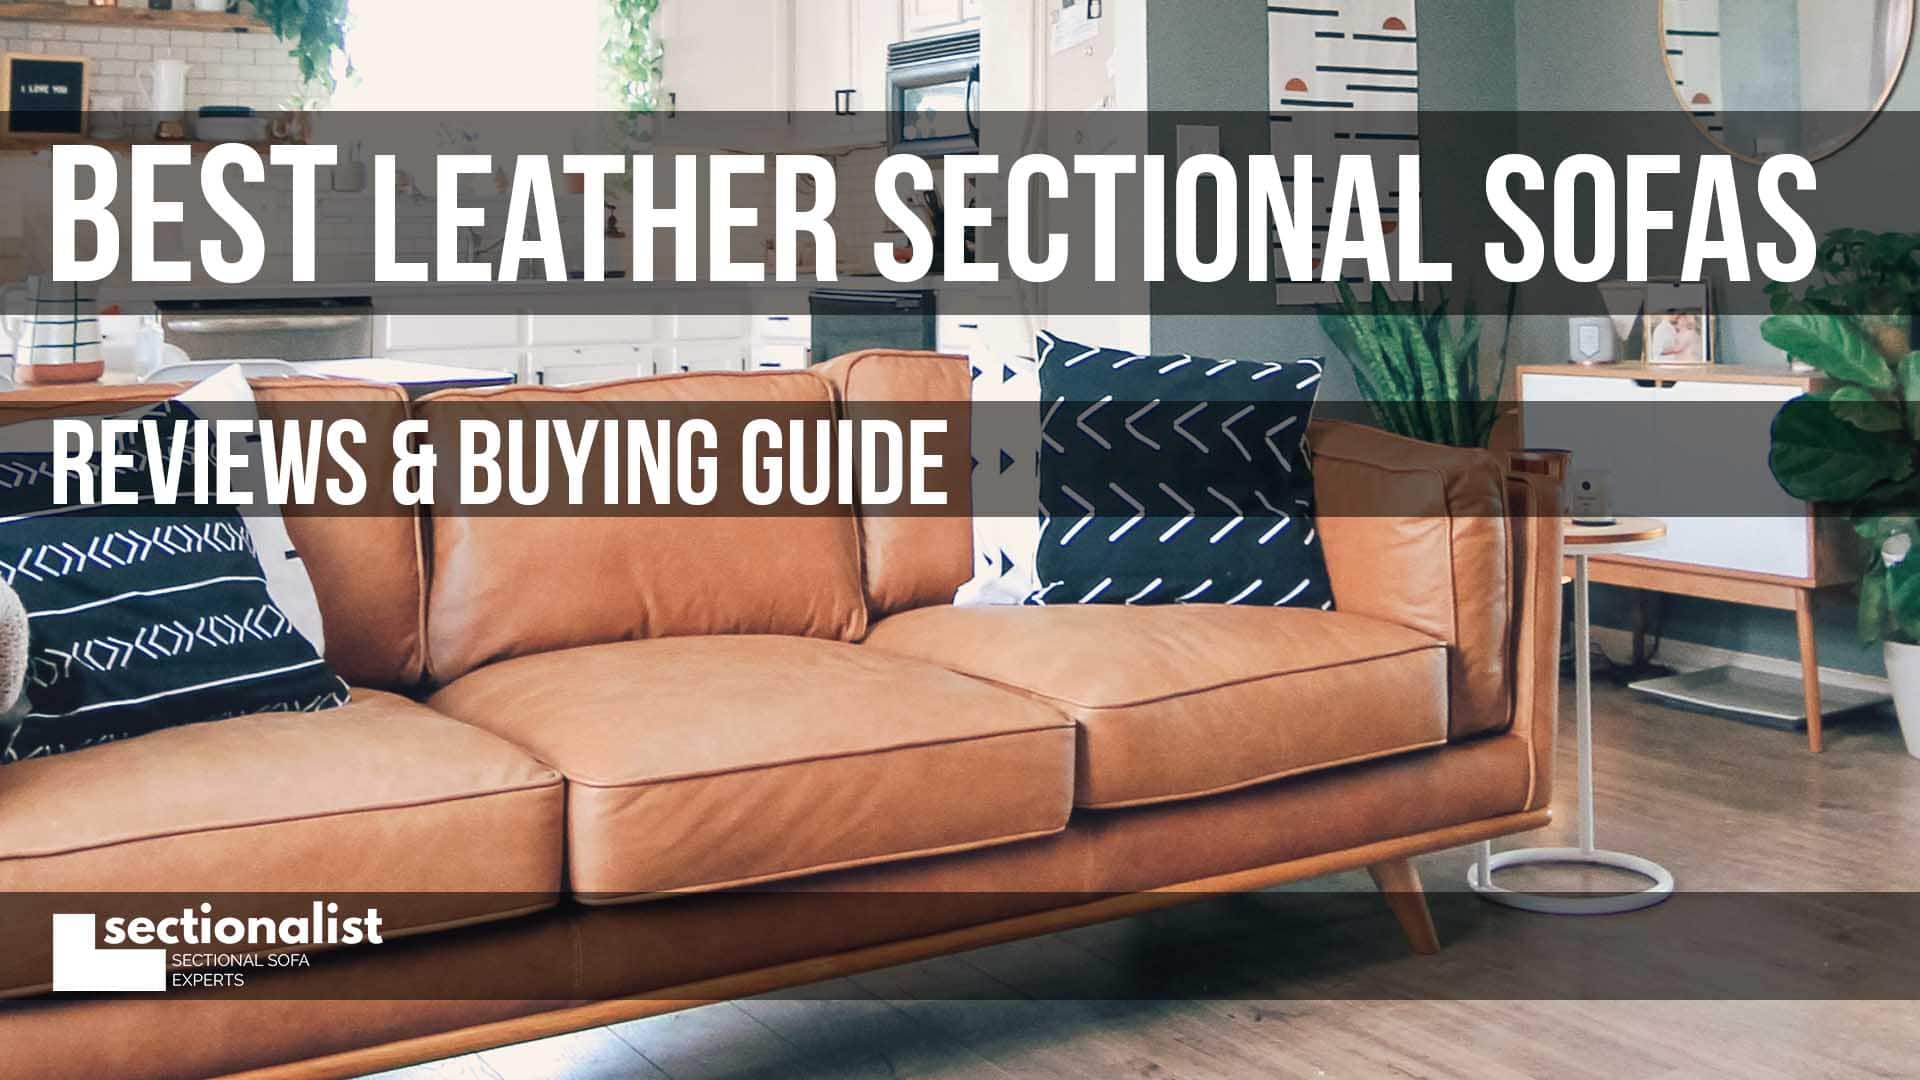 Best Leather Sectional Sofas 2022, High Quality Leather Sectionals